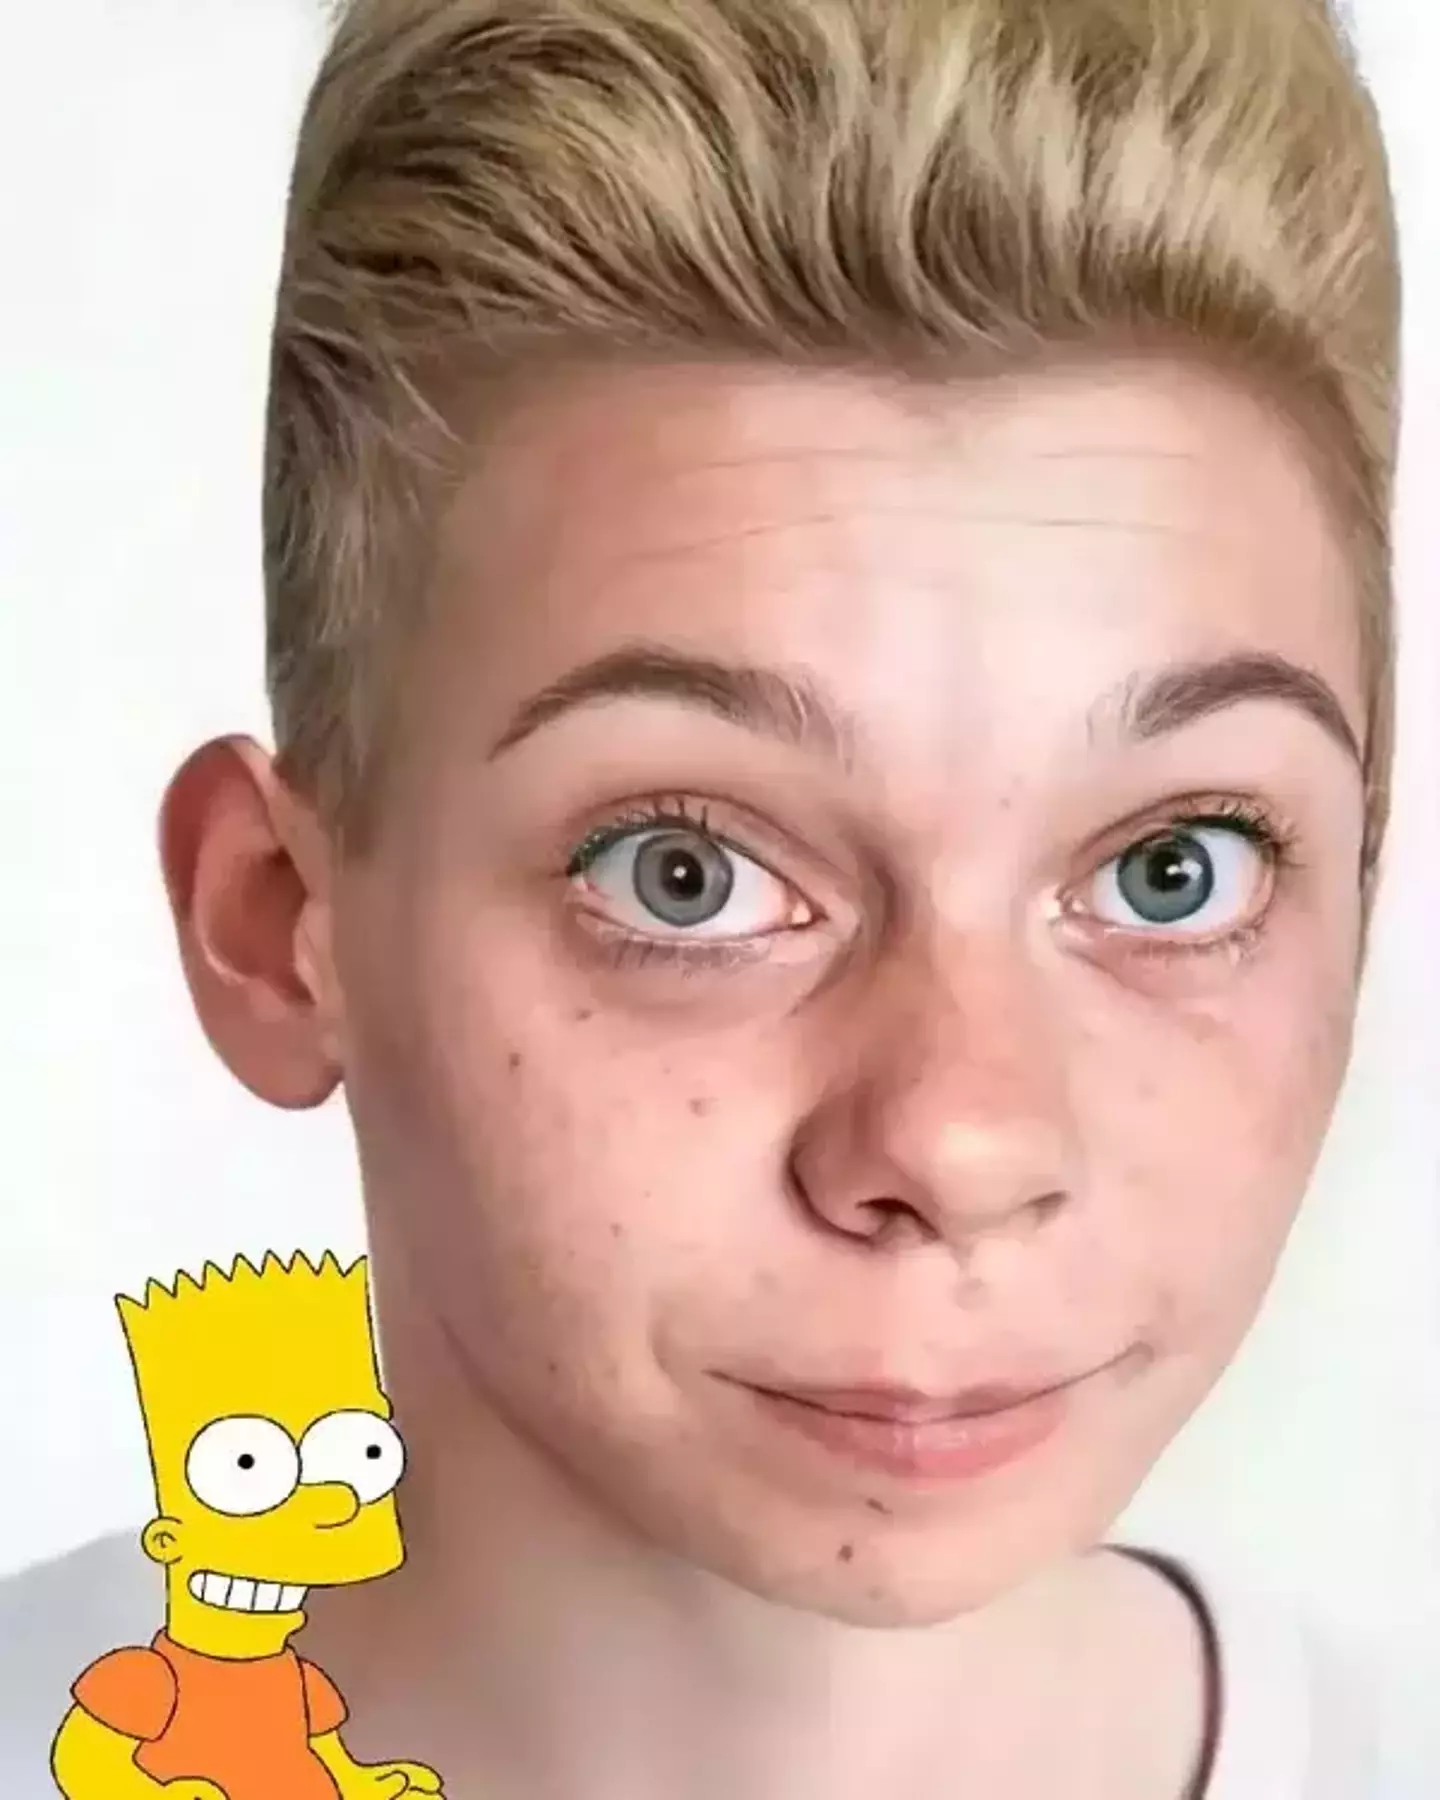 This is how Bart Simpson would look if he were real.